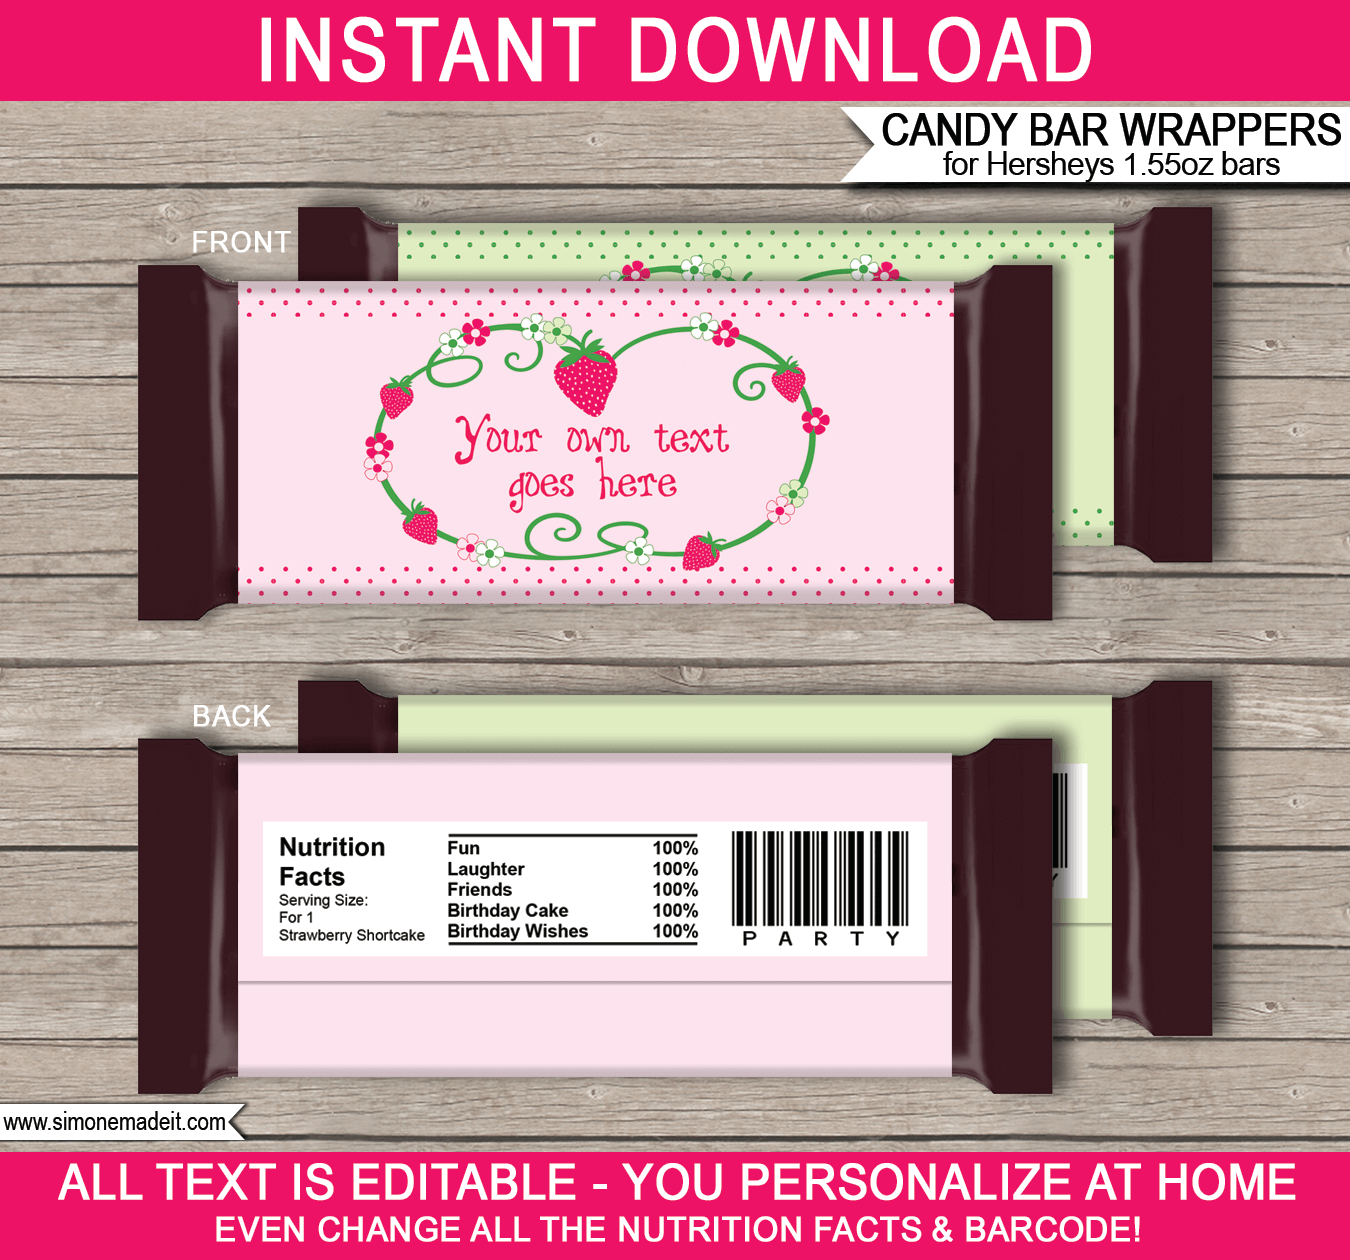 Printable Strawberry Shortcake Candy Bar Wrappers | Birthday Party Favors | Personalized Candy Bars | Editable Template | INSTANT DOWNLOAD $3.00 via simonemadeit.com